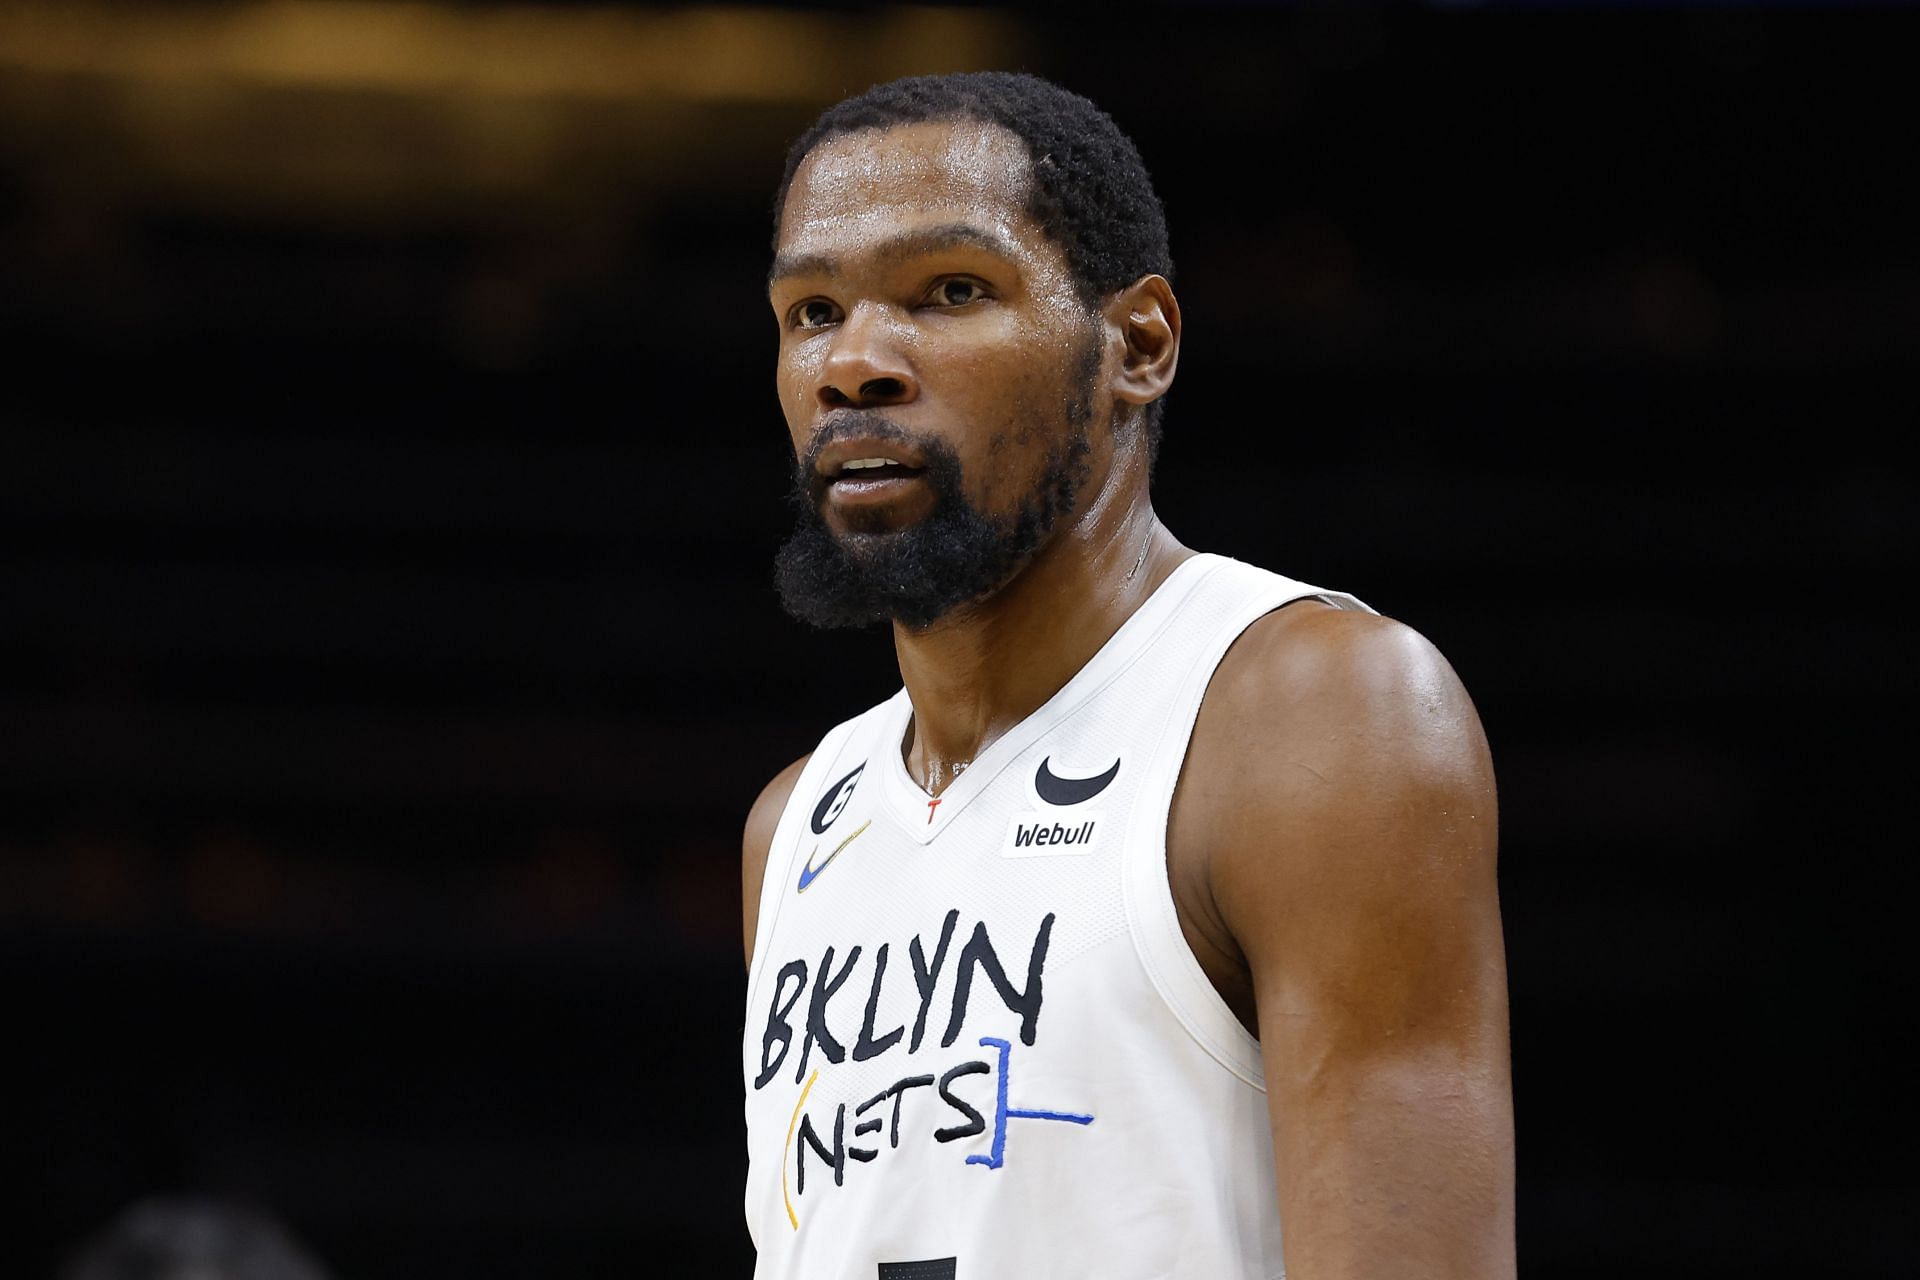 “The Lakers were offering you Russ and future picks” – Nick Wright speculates the Brooklyn Nets took the Dallas Mavericks’s offer over the LA Lakers’ package because they’re not trading Kevin Durant